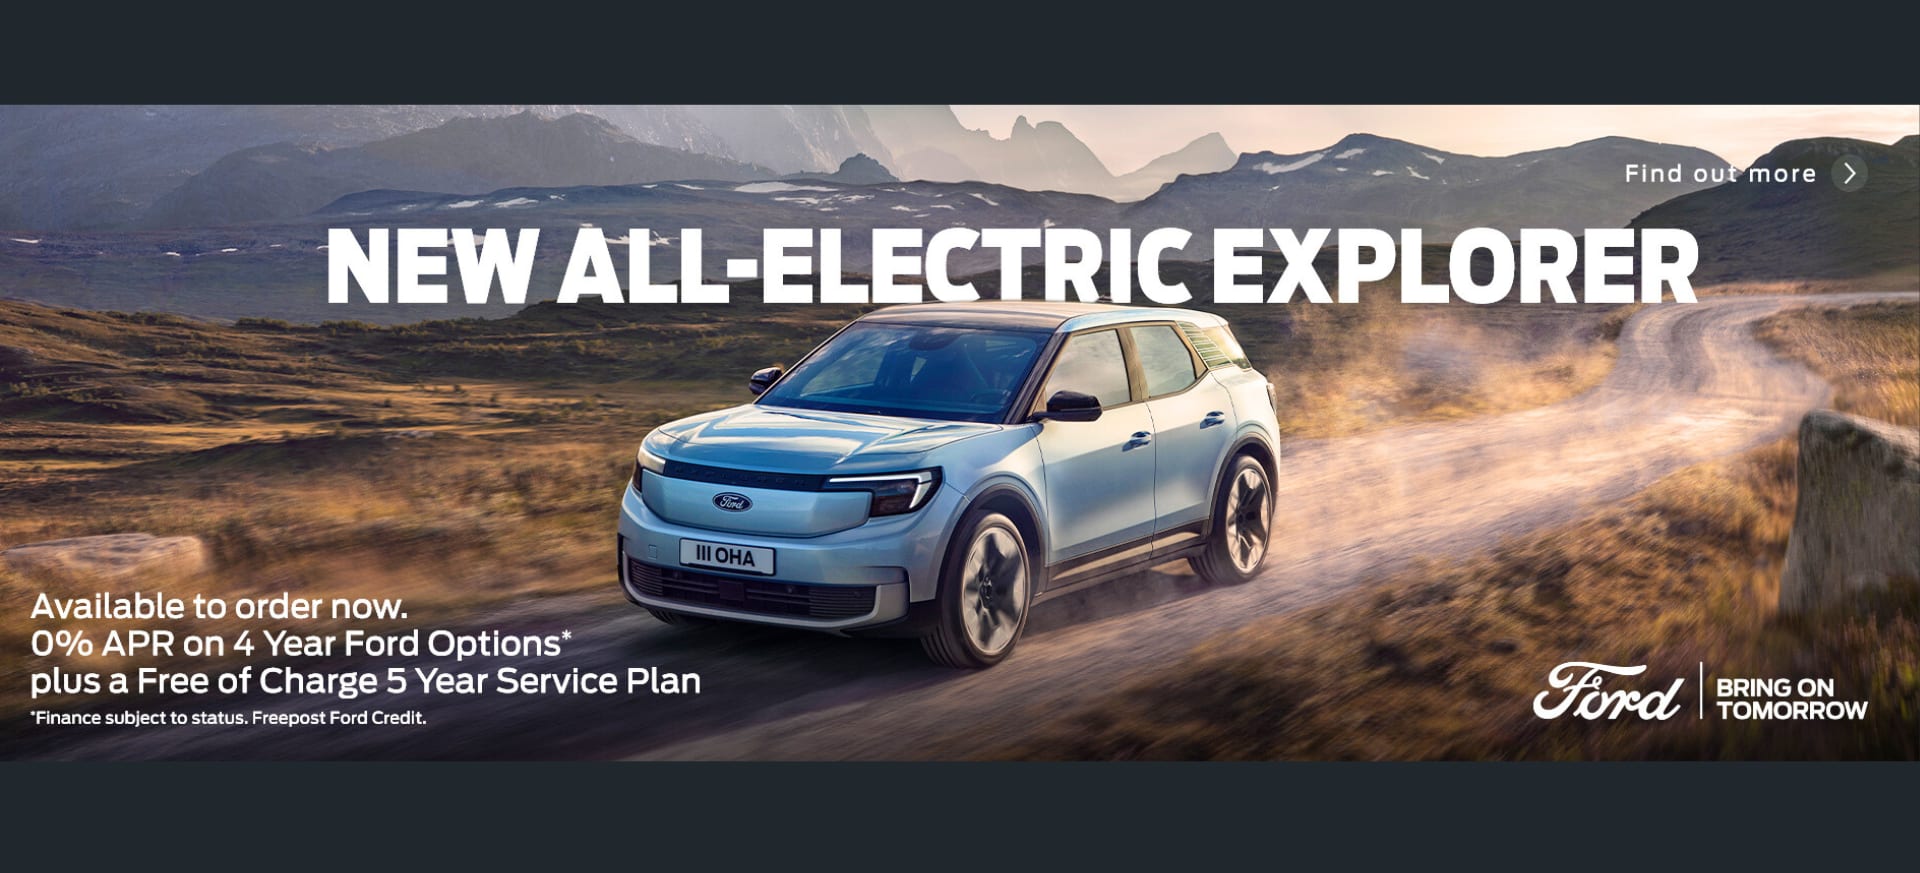 NEW ALL-ELECTRIC EXPLORER